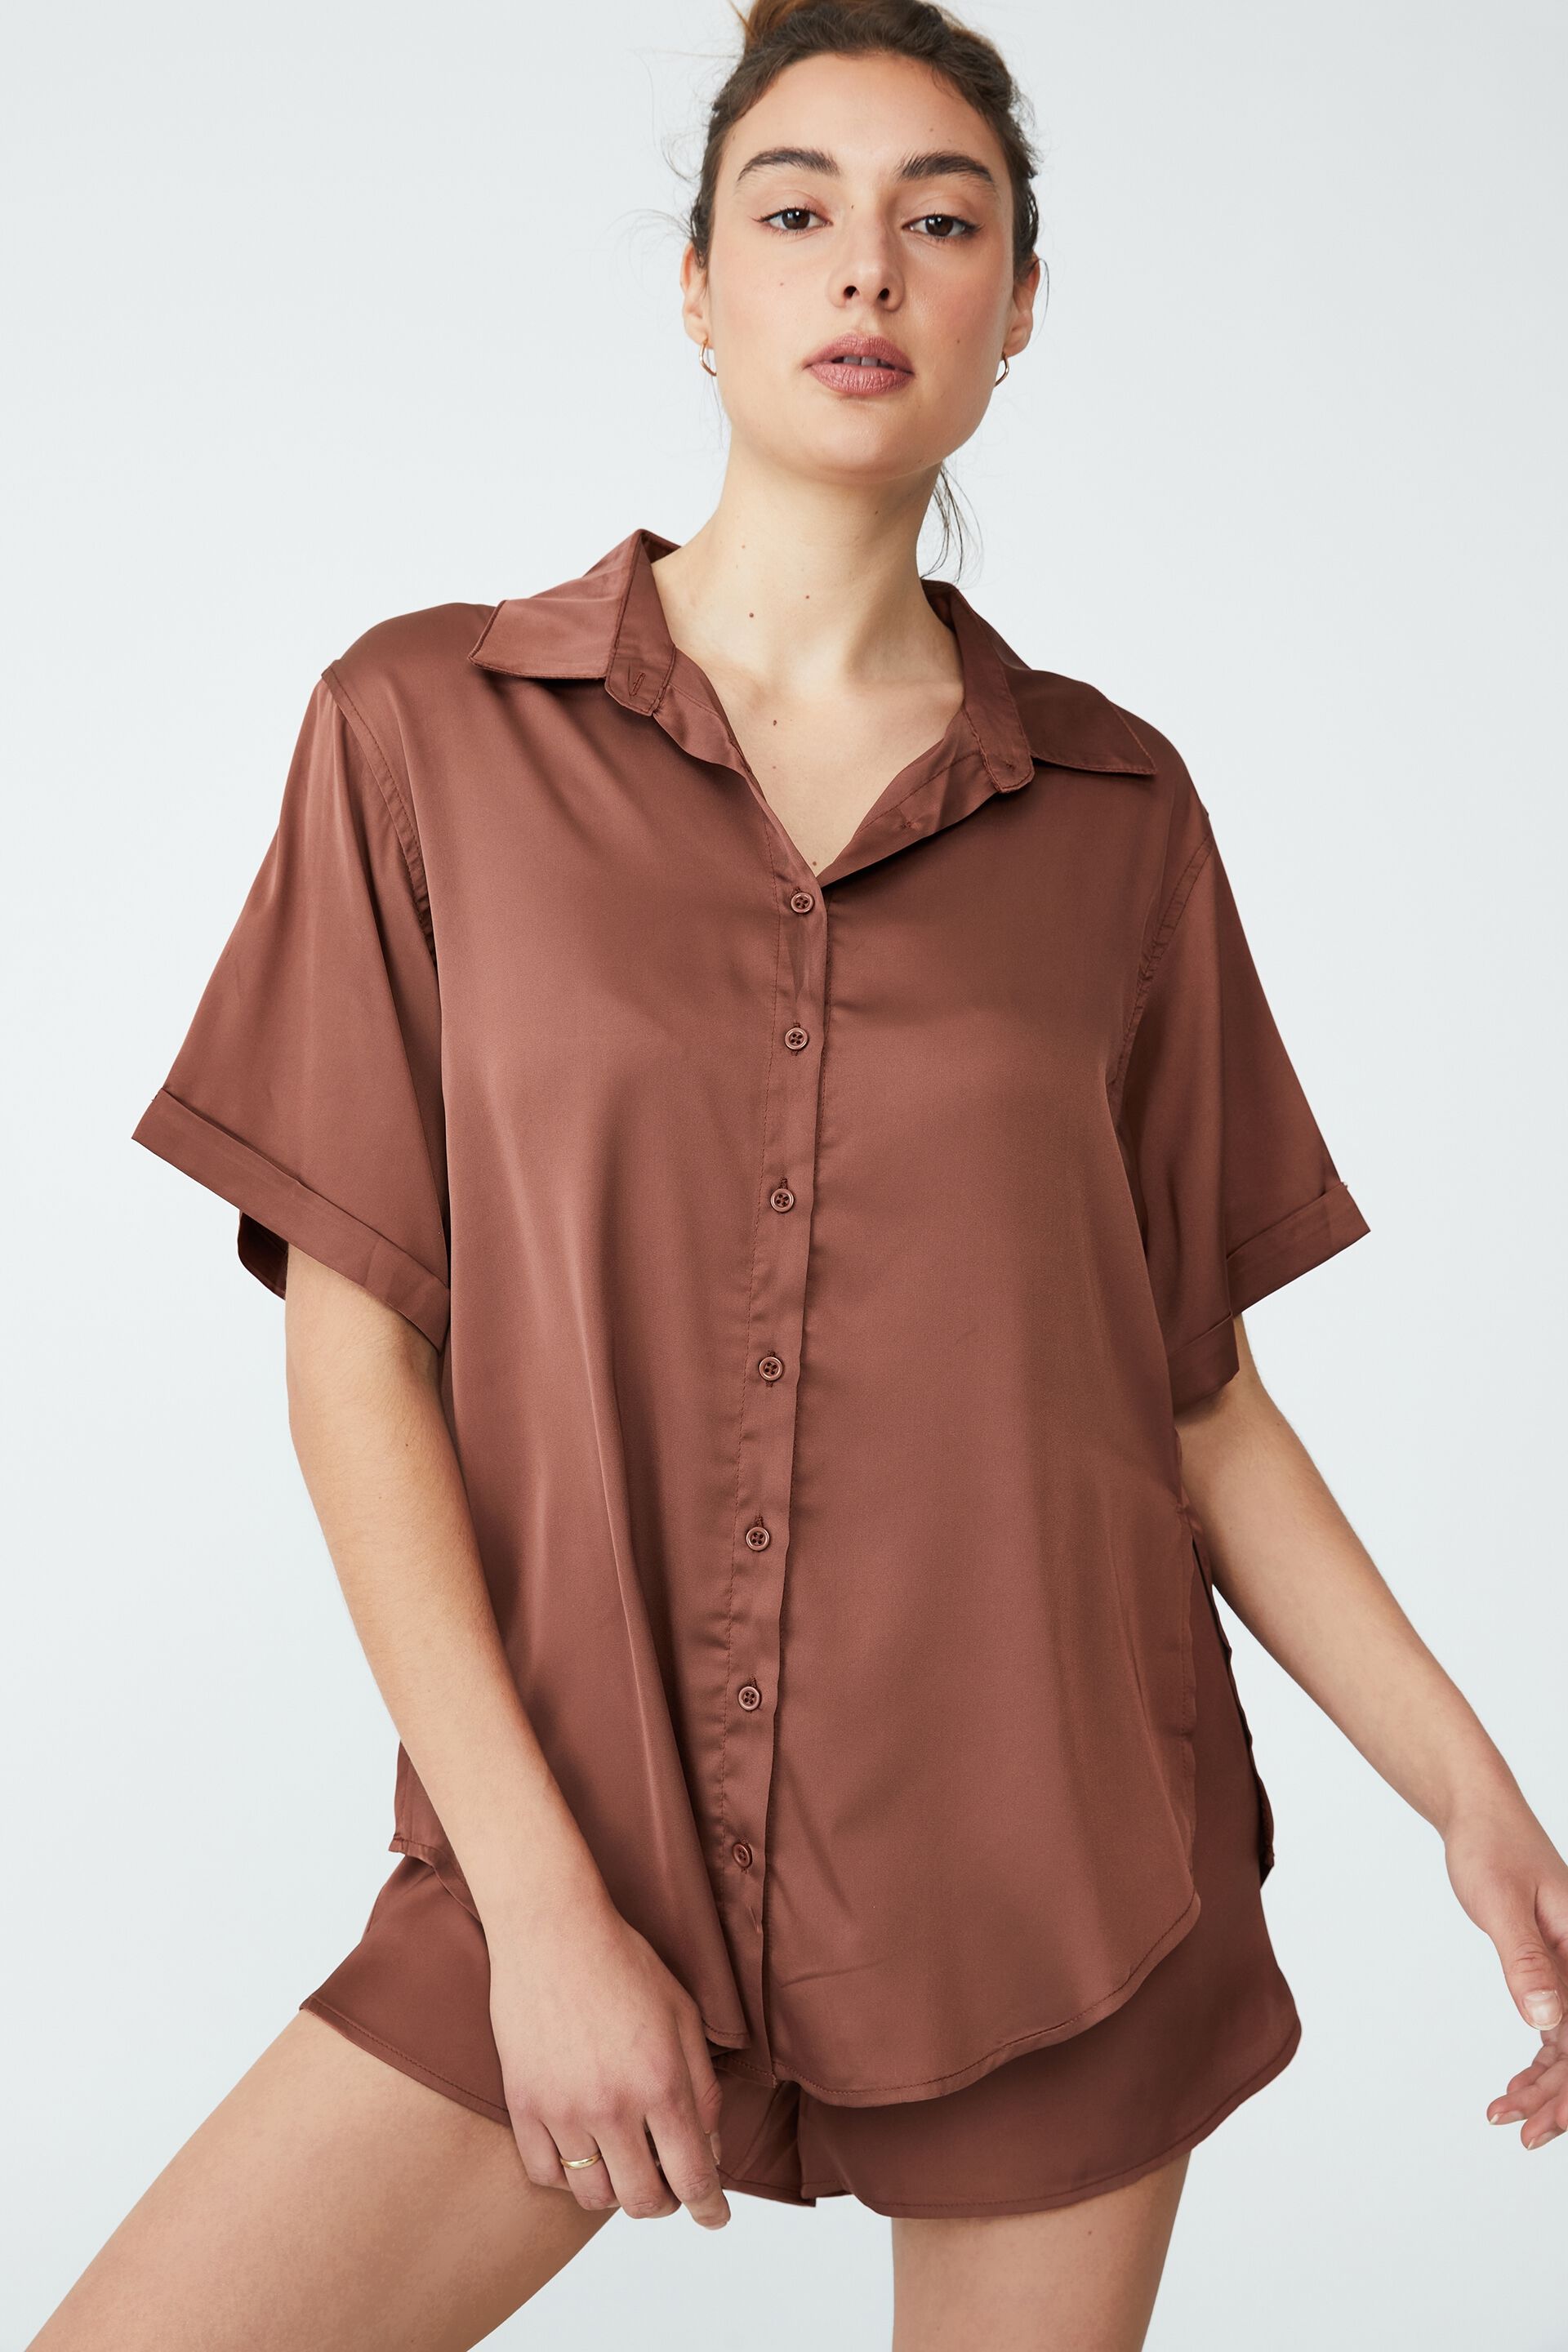 Gifts Gifts For Her | Short Sleeve Satin Sleep Shirt - ZF21117